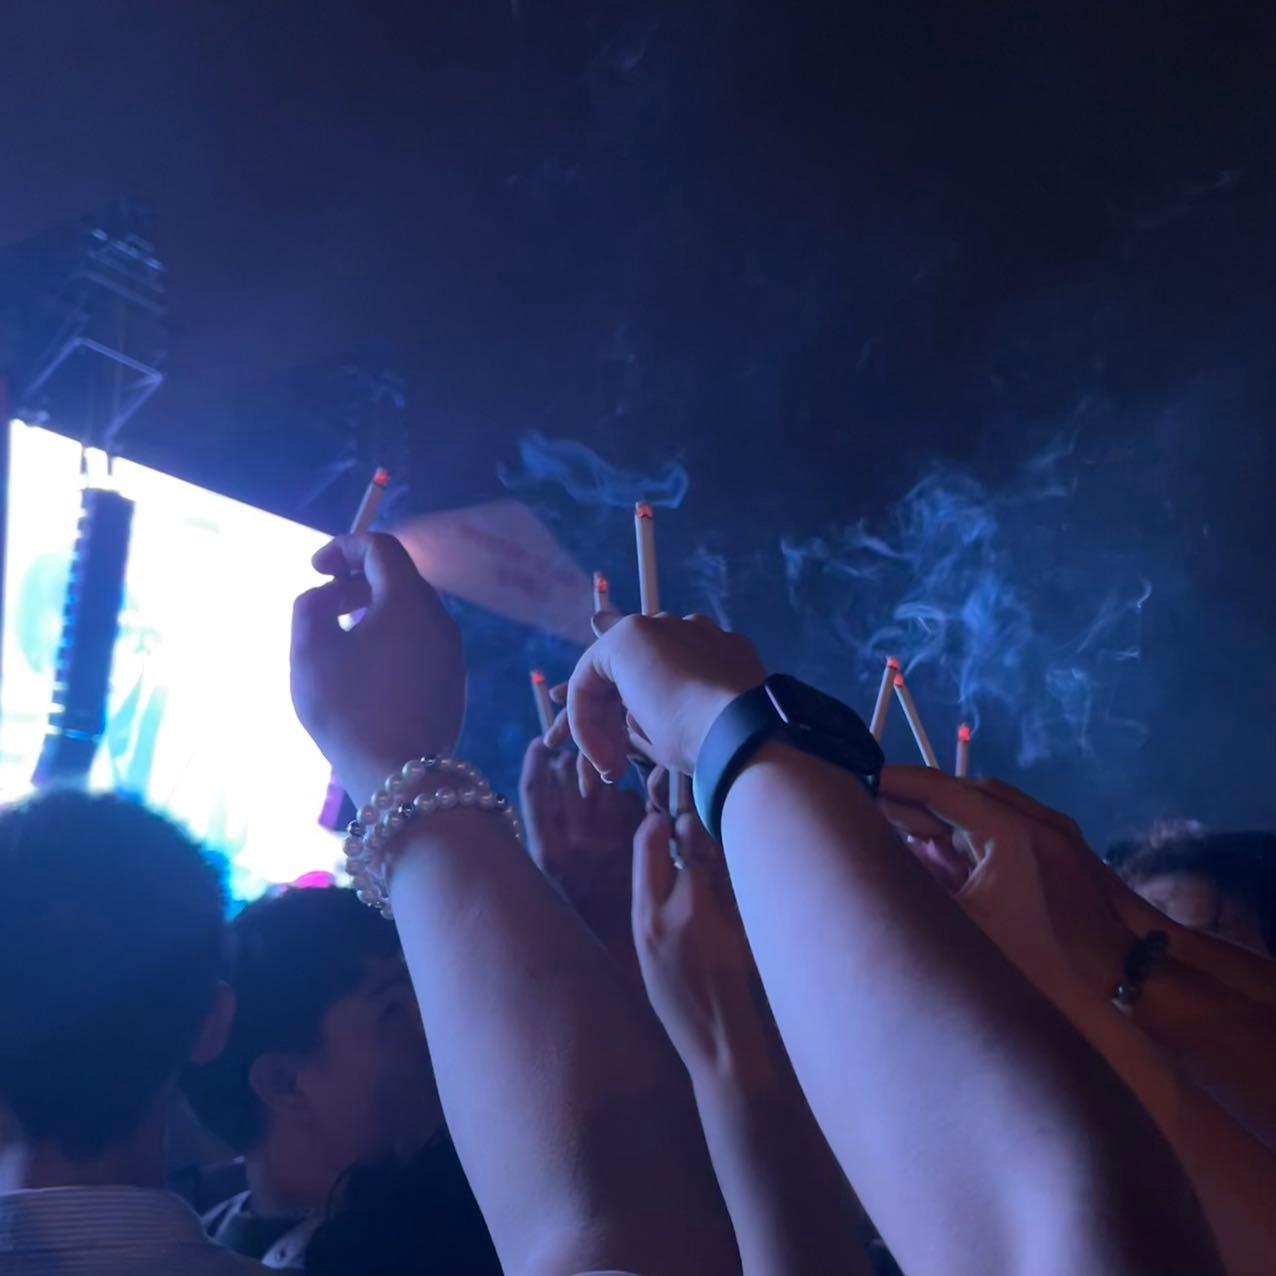 Hey, do you smoke too? Deca Joins' last song "Wu Du" happens to follow Grass Stage's performance